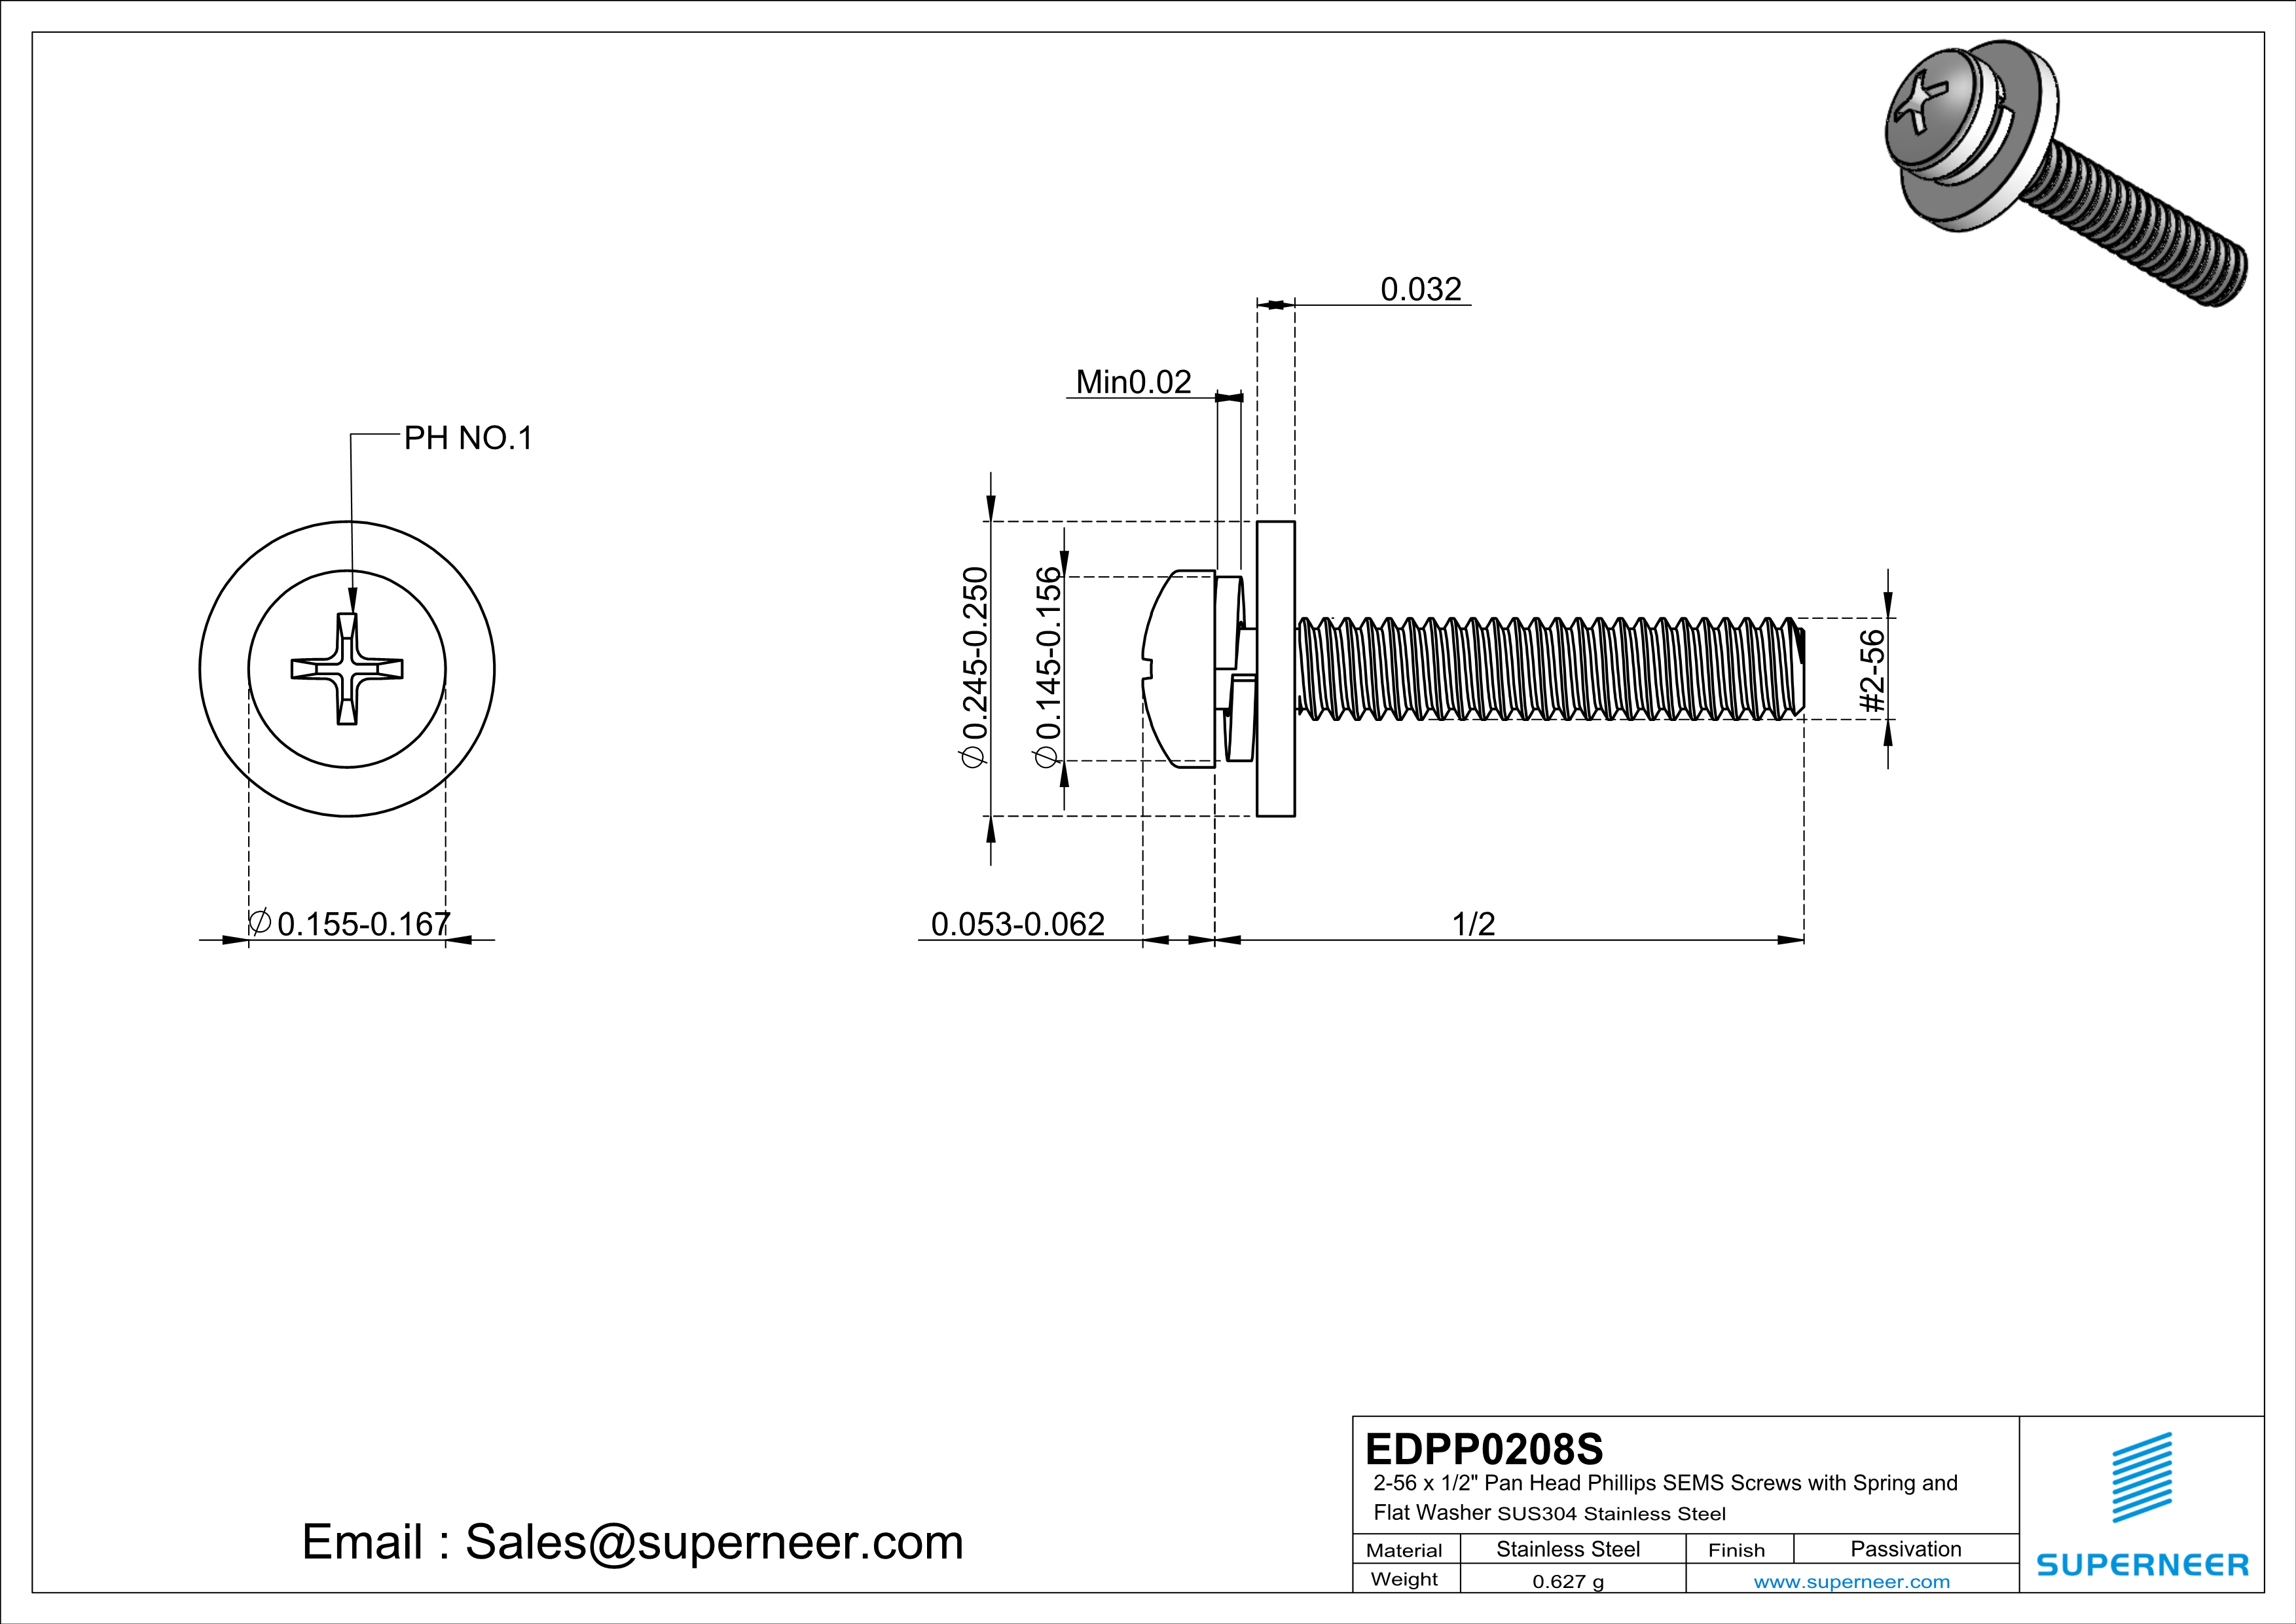 2-56 x 1/2" Pan Head Phillips SEMS Screws with Spring and Flat Washer SUS304 Stainless Steel Inox